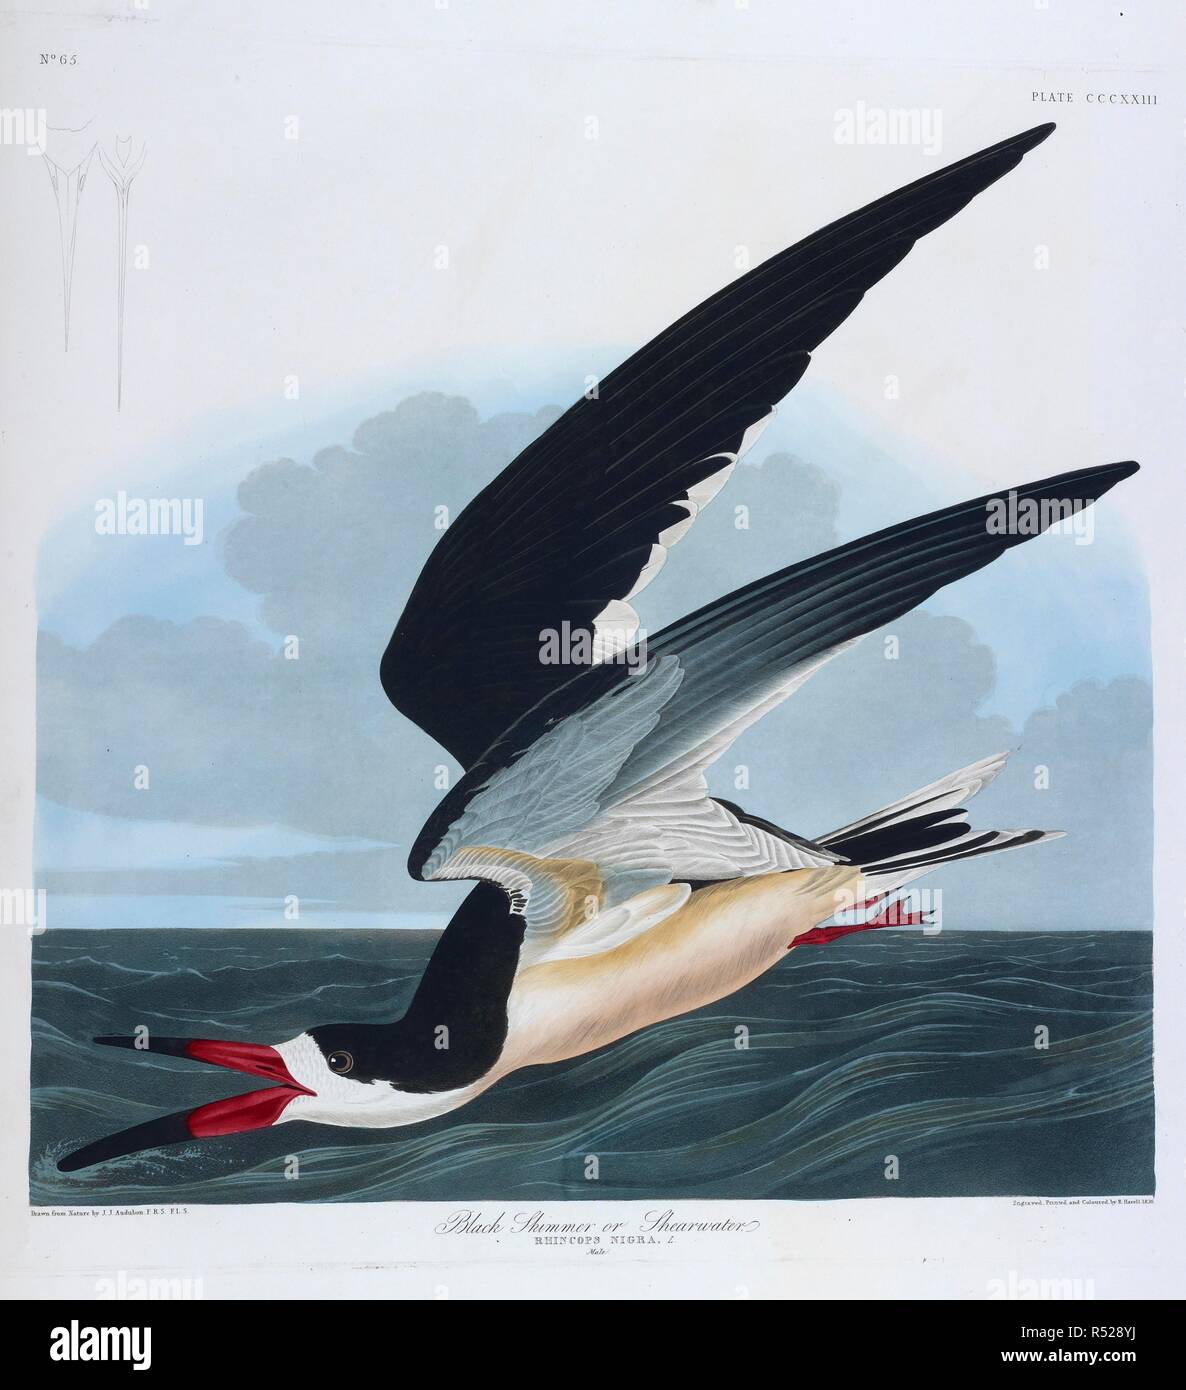 Black skimmer or shearwater. Male. The Birds of America, from original drawings. London, 1827-38. One bird flying over the sea. Colour illustration drawn by Audubon. Source: N.L.TAB.2.(3). plate 232. Language: English. Stock Photo